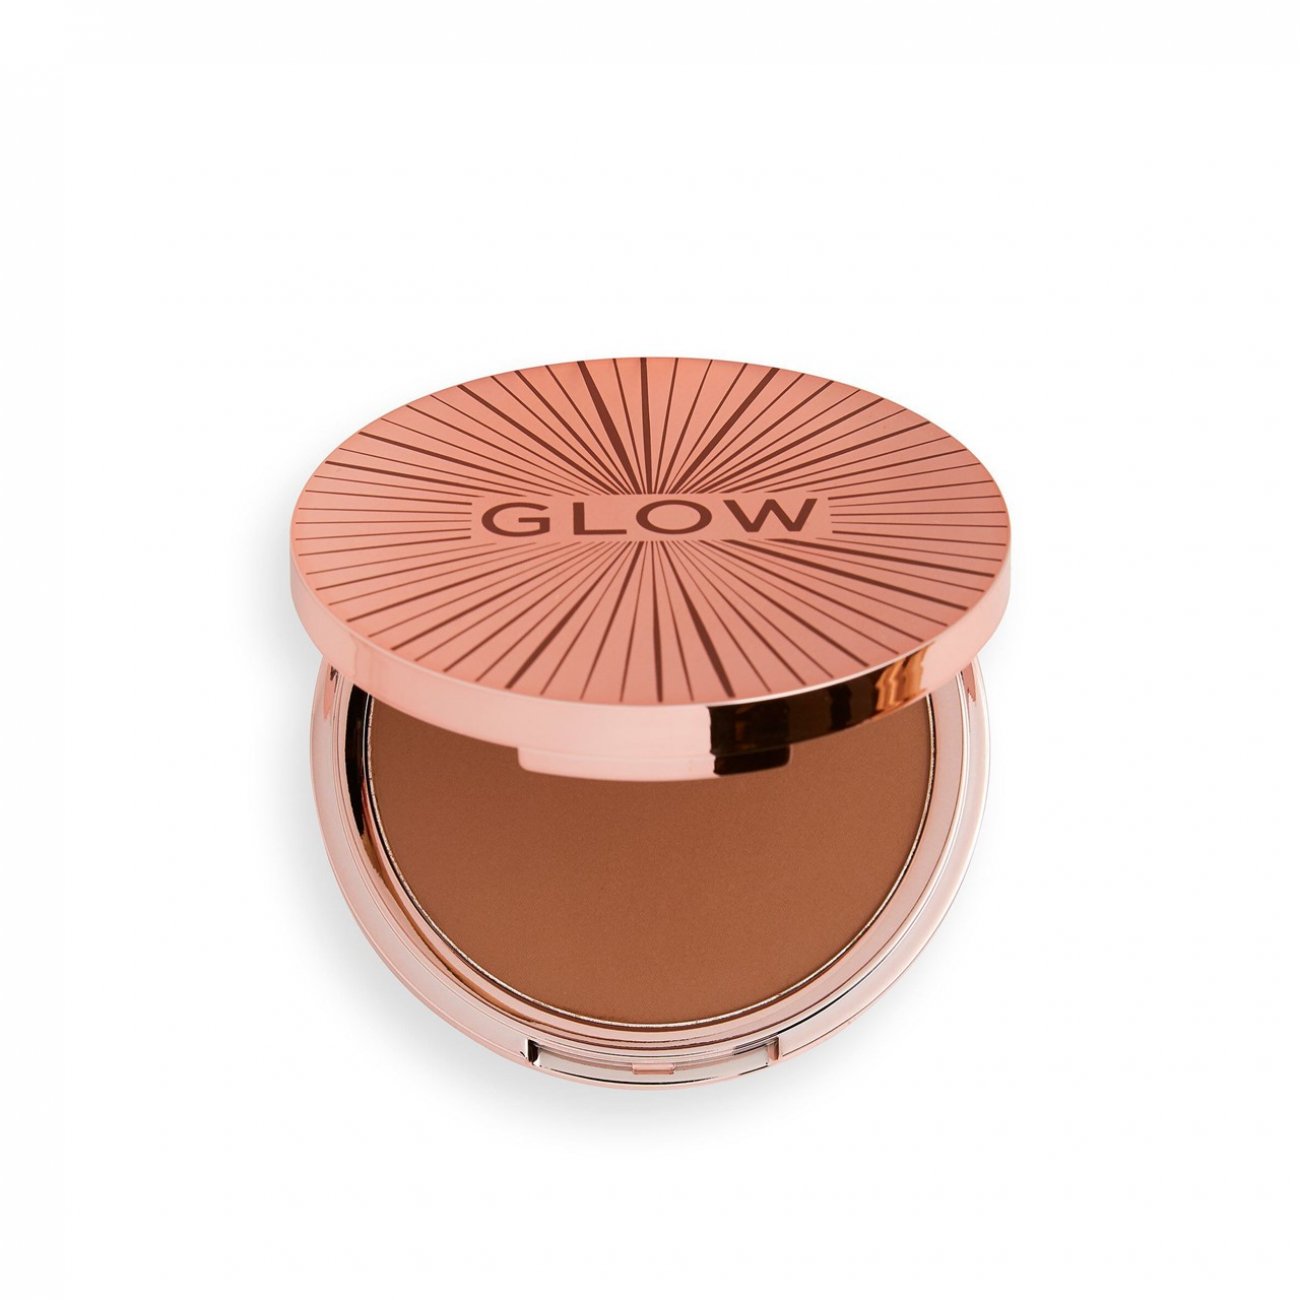 How to Apply Bronzer for a Sunkissed Glow All Year Round